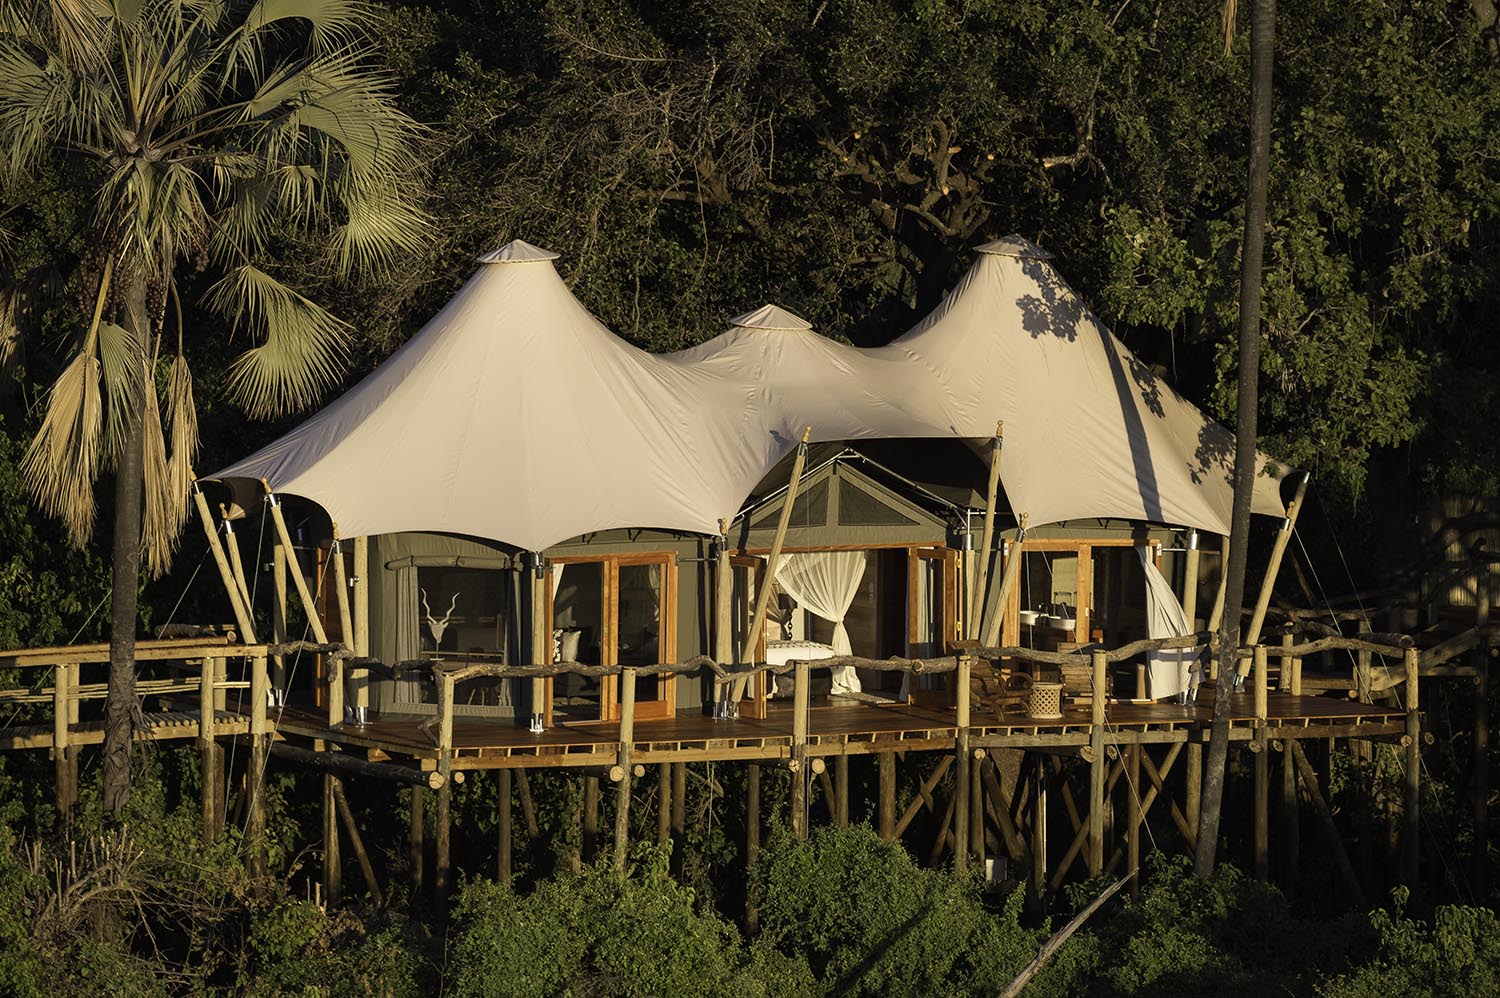 Elevated glamping tent on a wooden deck in the trees